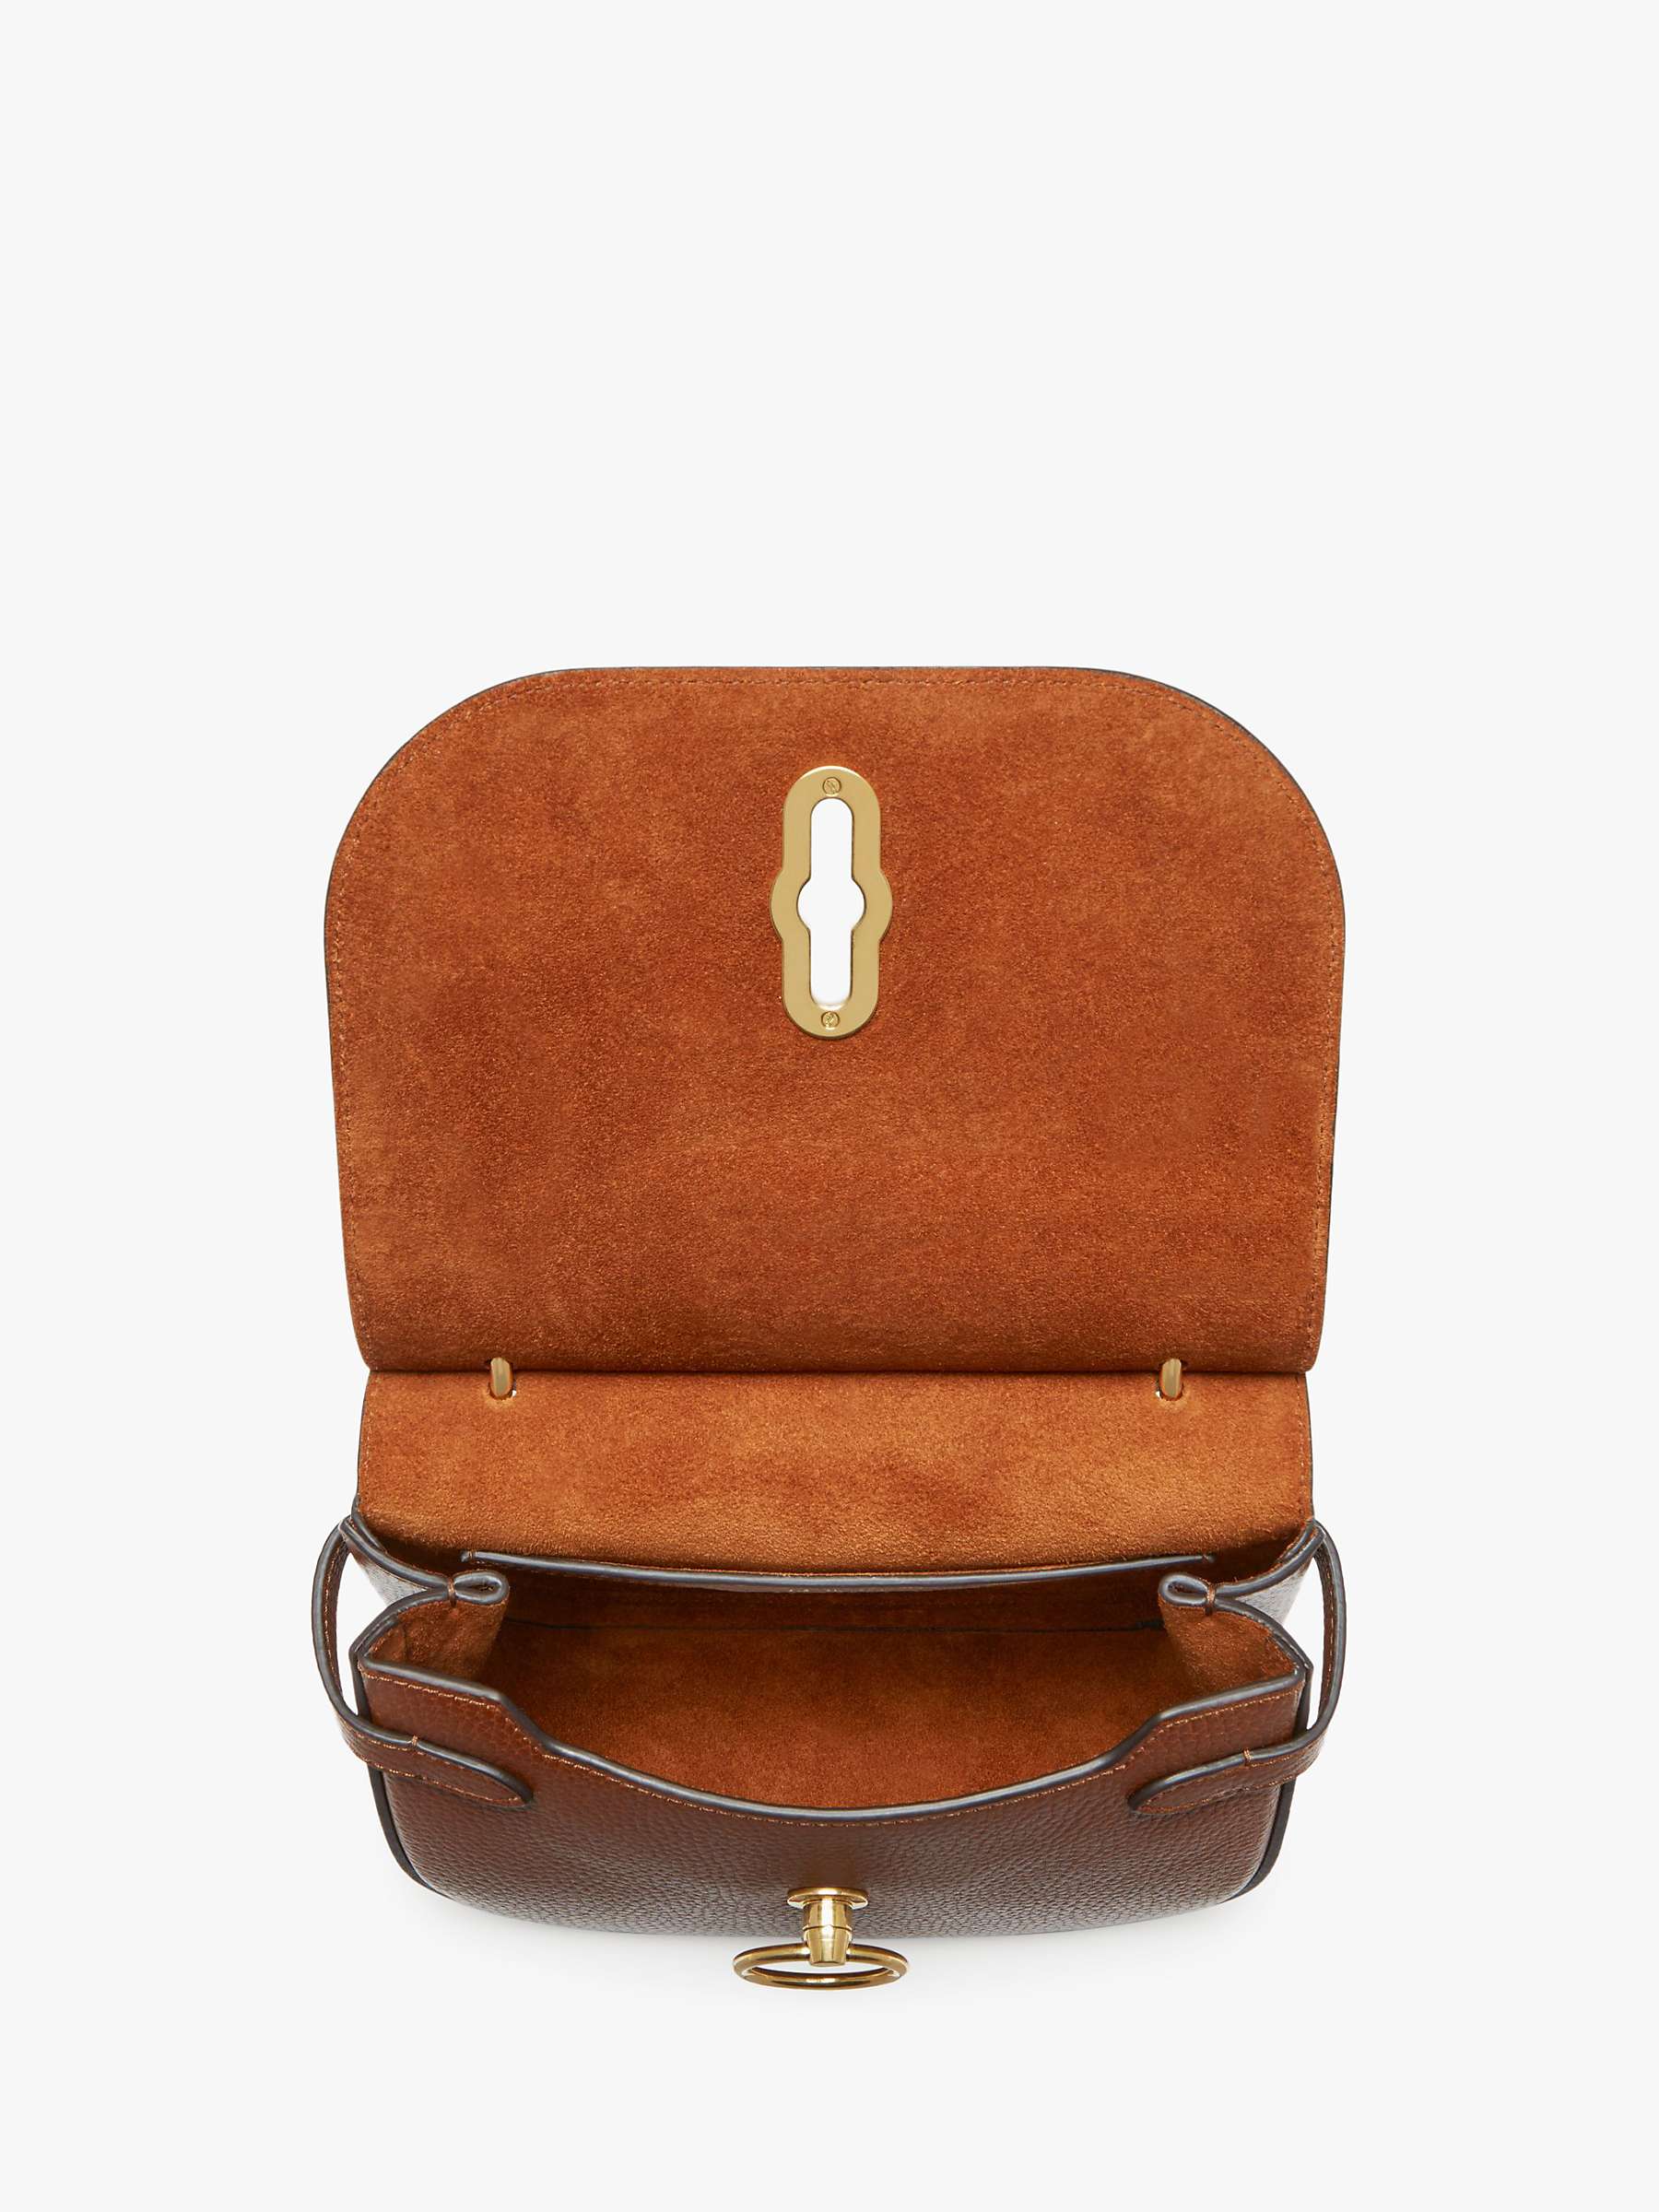 Buy Mulberry Small Amberley Grain Veg Tanned Leather Satchel Bag Online at johnlewis.com